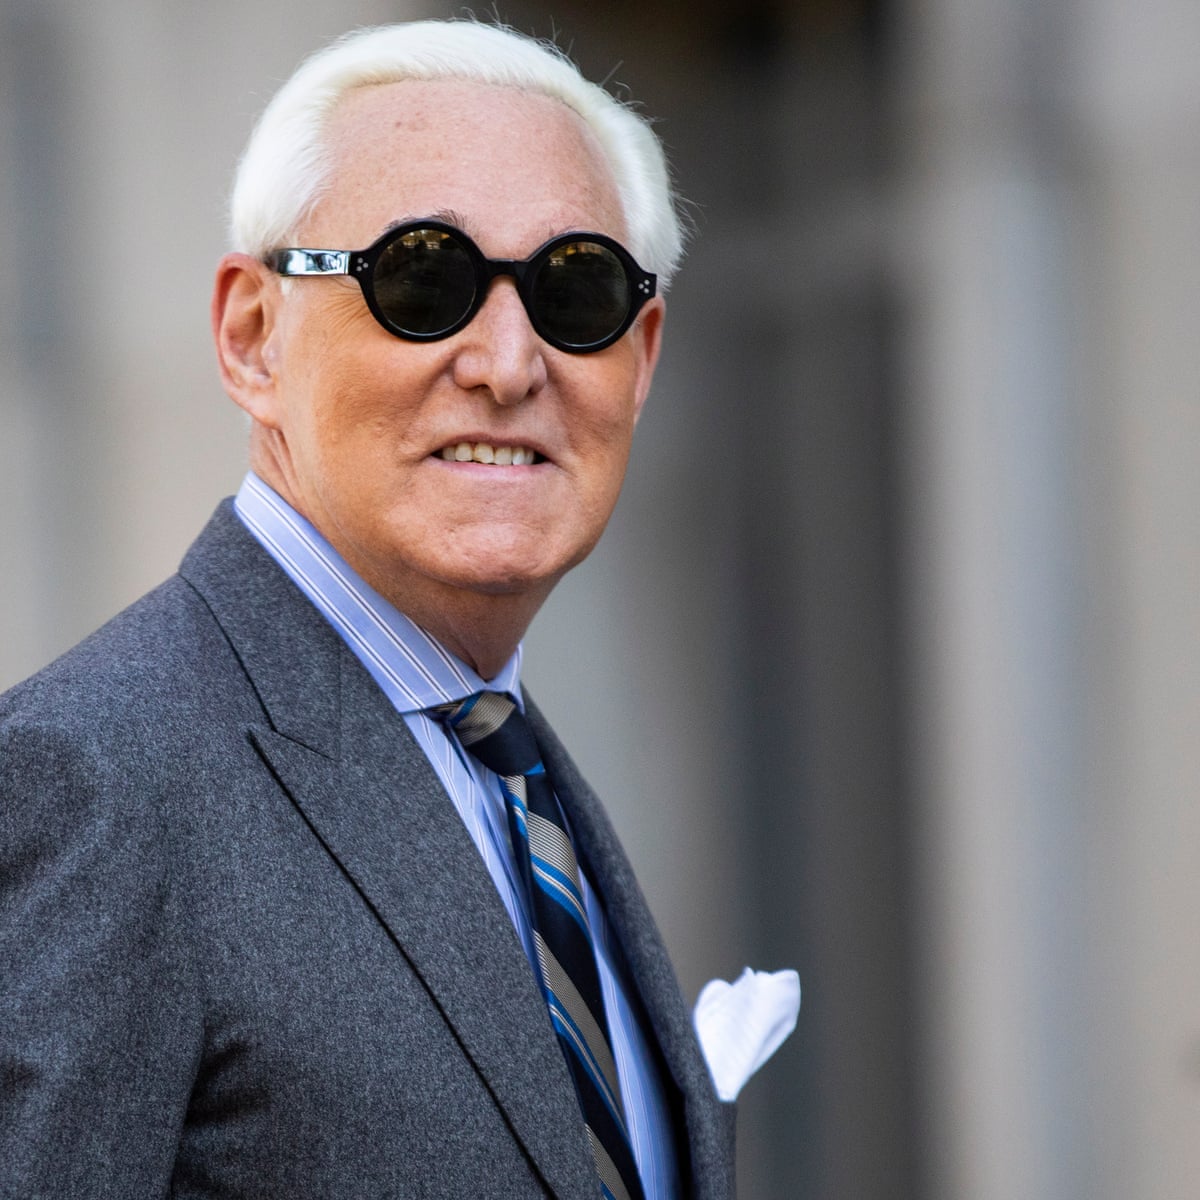 Who is roger stones